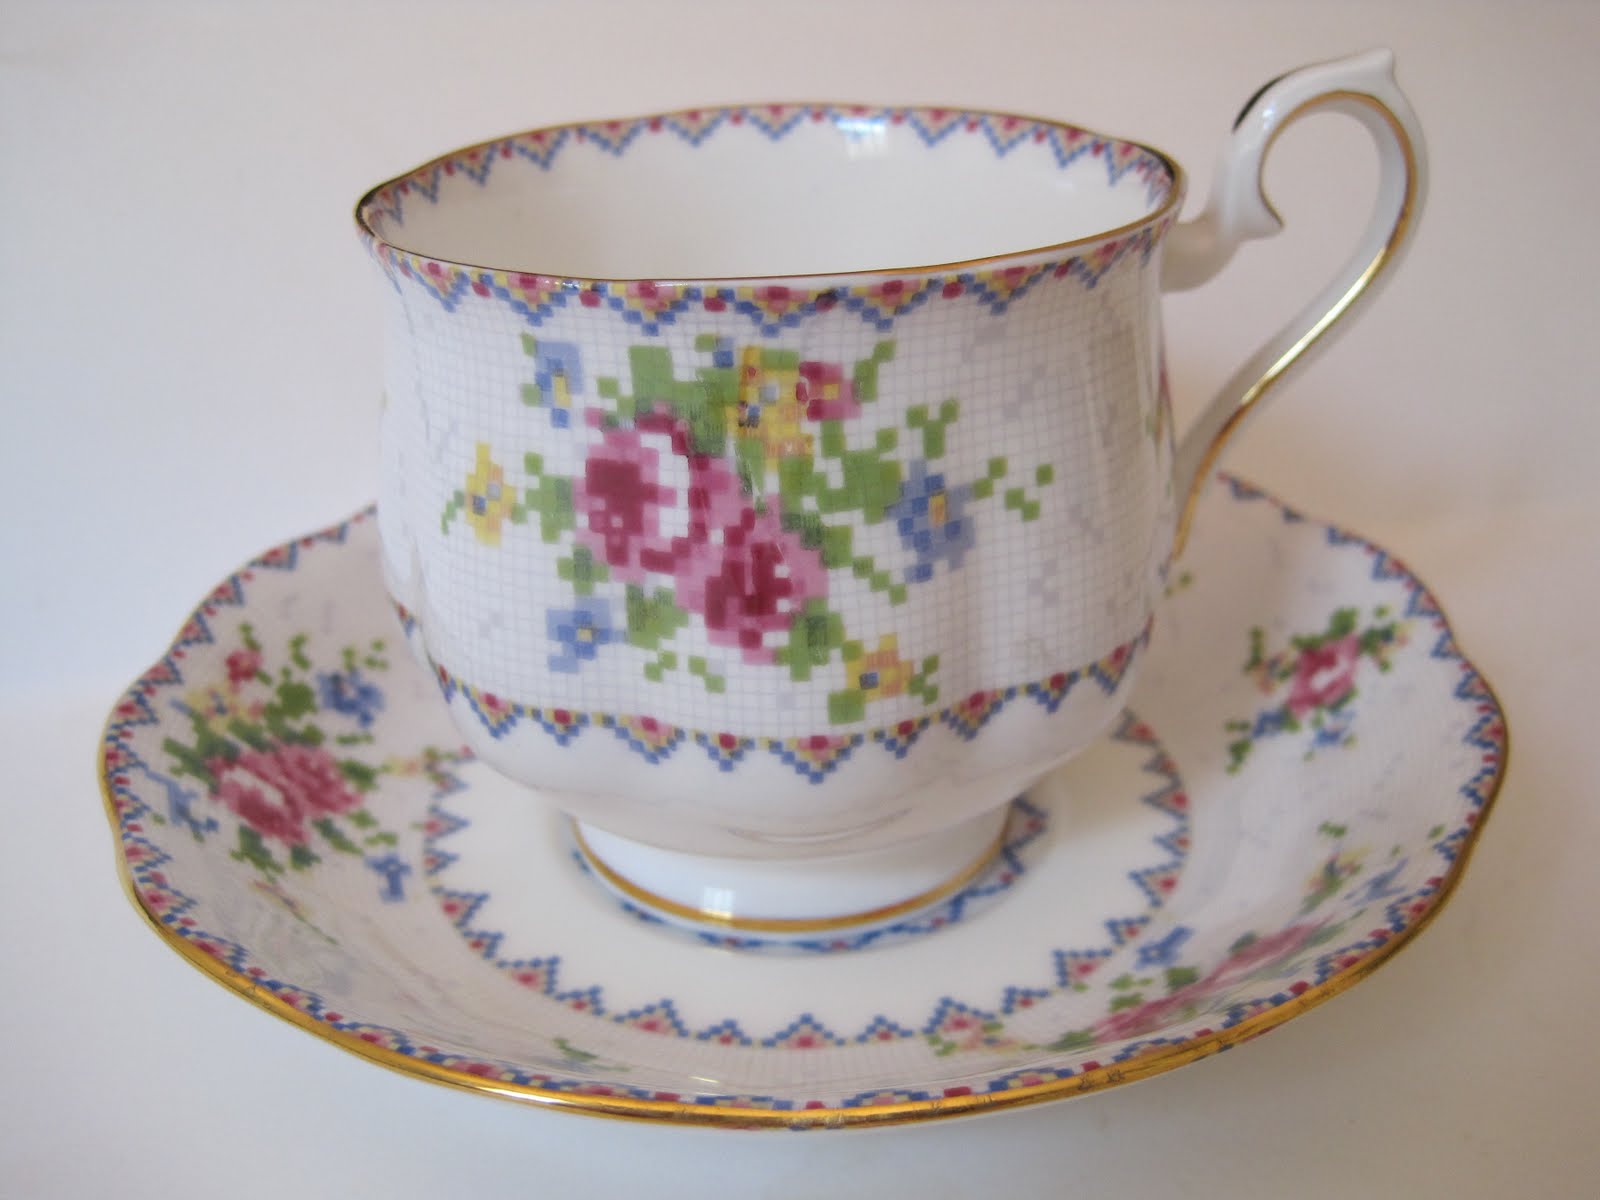 Tea With Friends: Royal Albert's Petit Point China